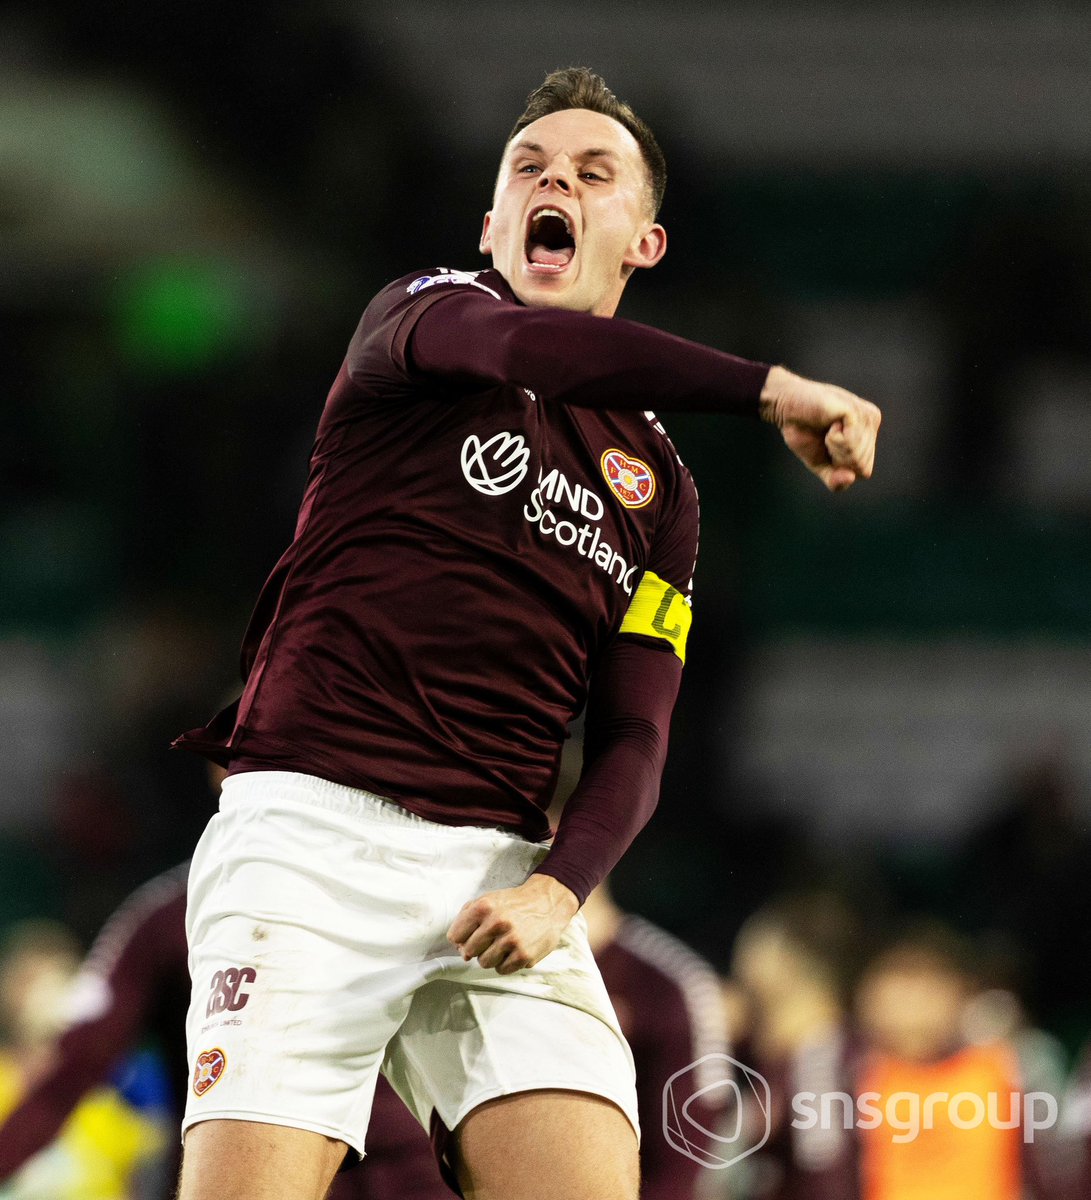 Since the start of last season Hearts have played the old firm 13 times and @Shankland_25 has scored 8 times. 

Wonder the last time we had a player with that sort of goalscoring record against them?